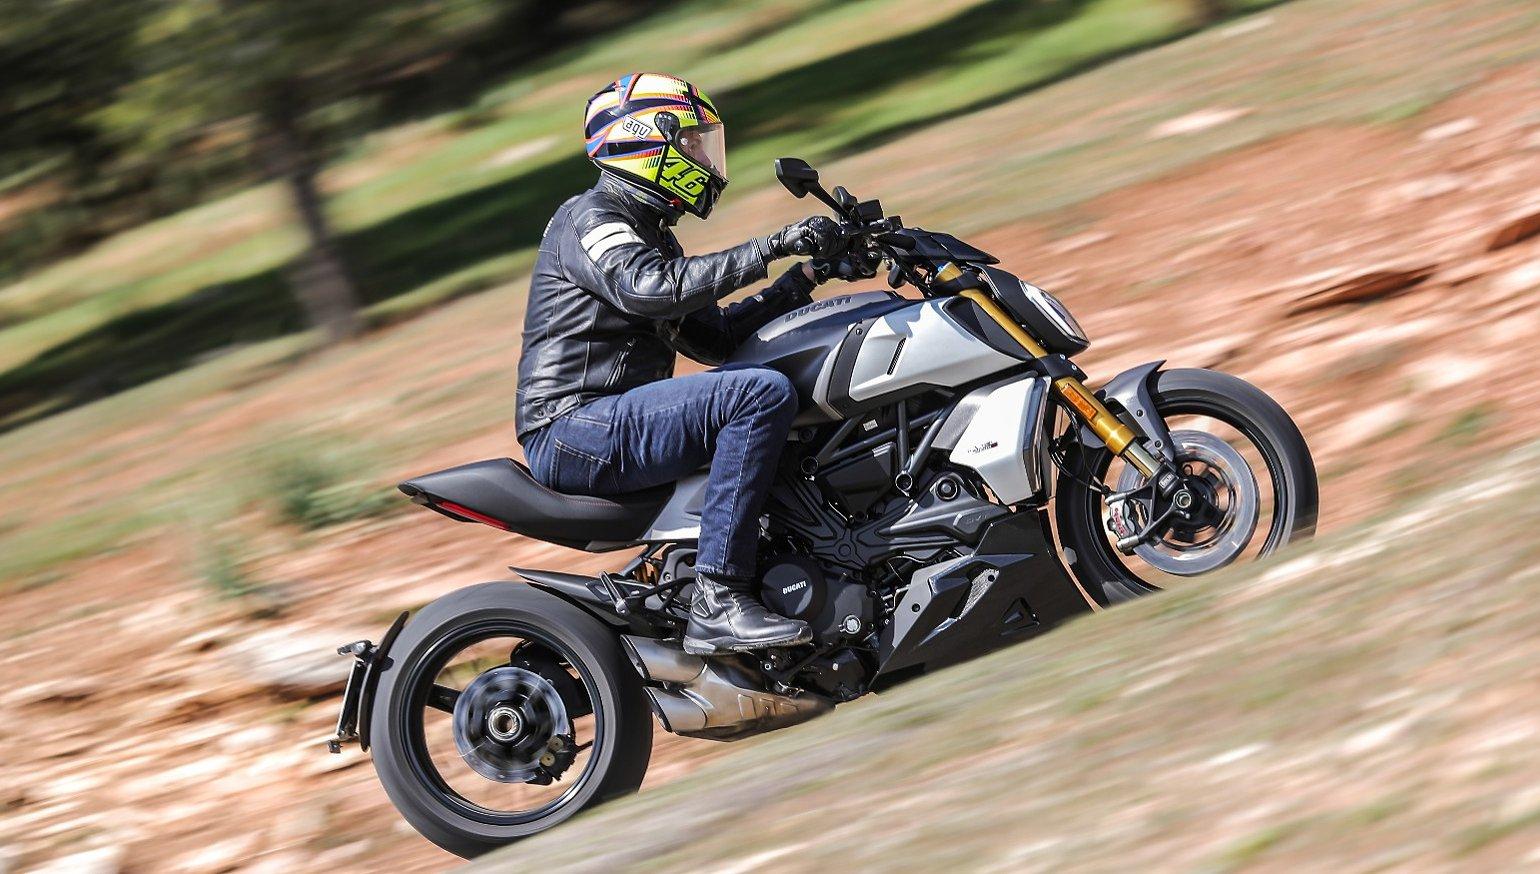 Revzilla: CT Digest: 2019 Ducati Diavel 1260 S First Ride Review